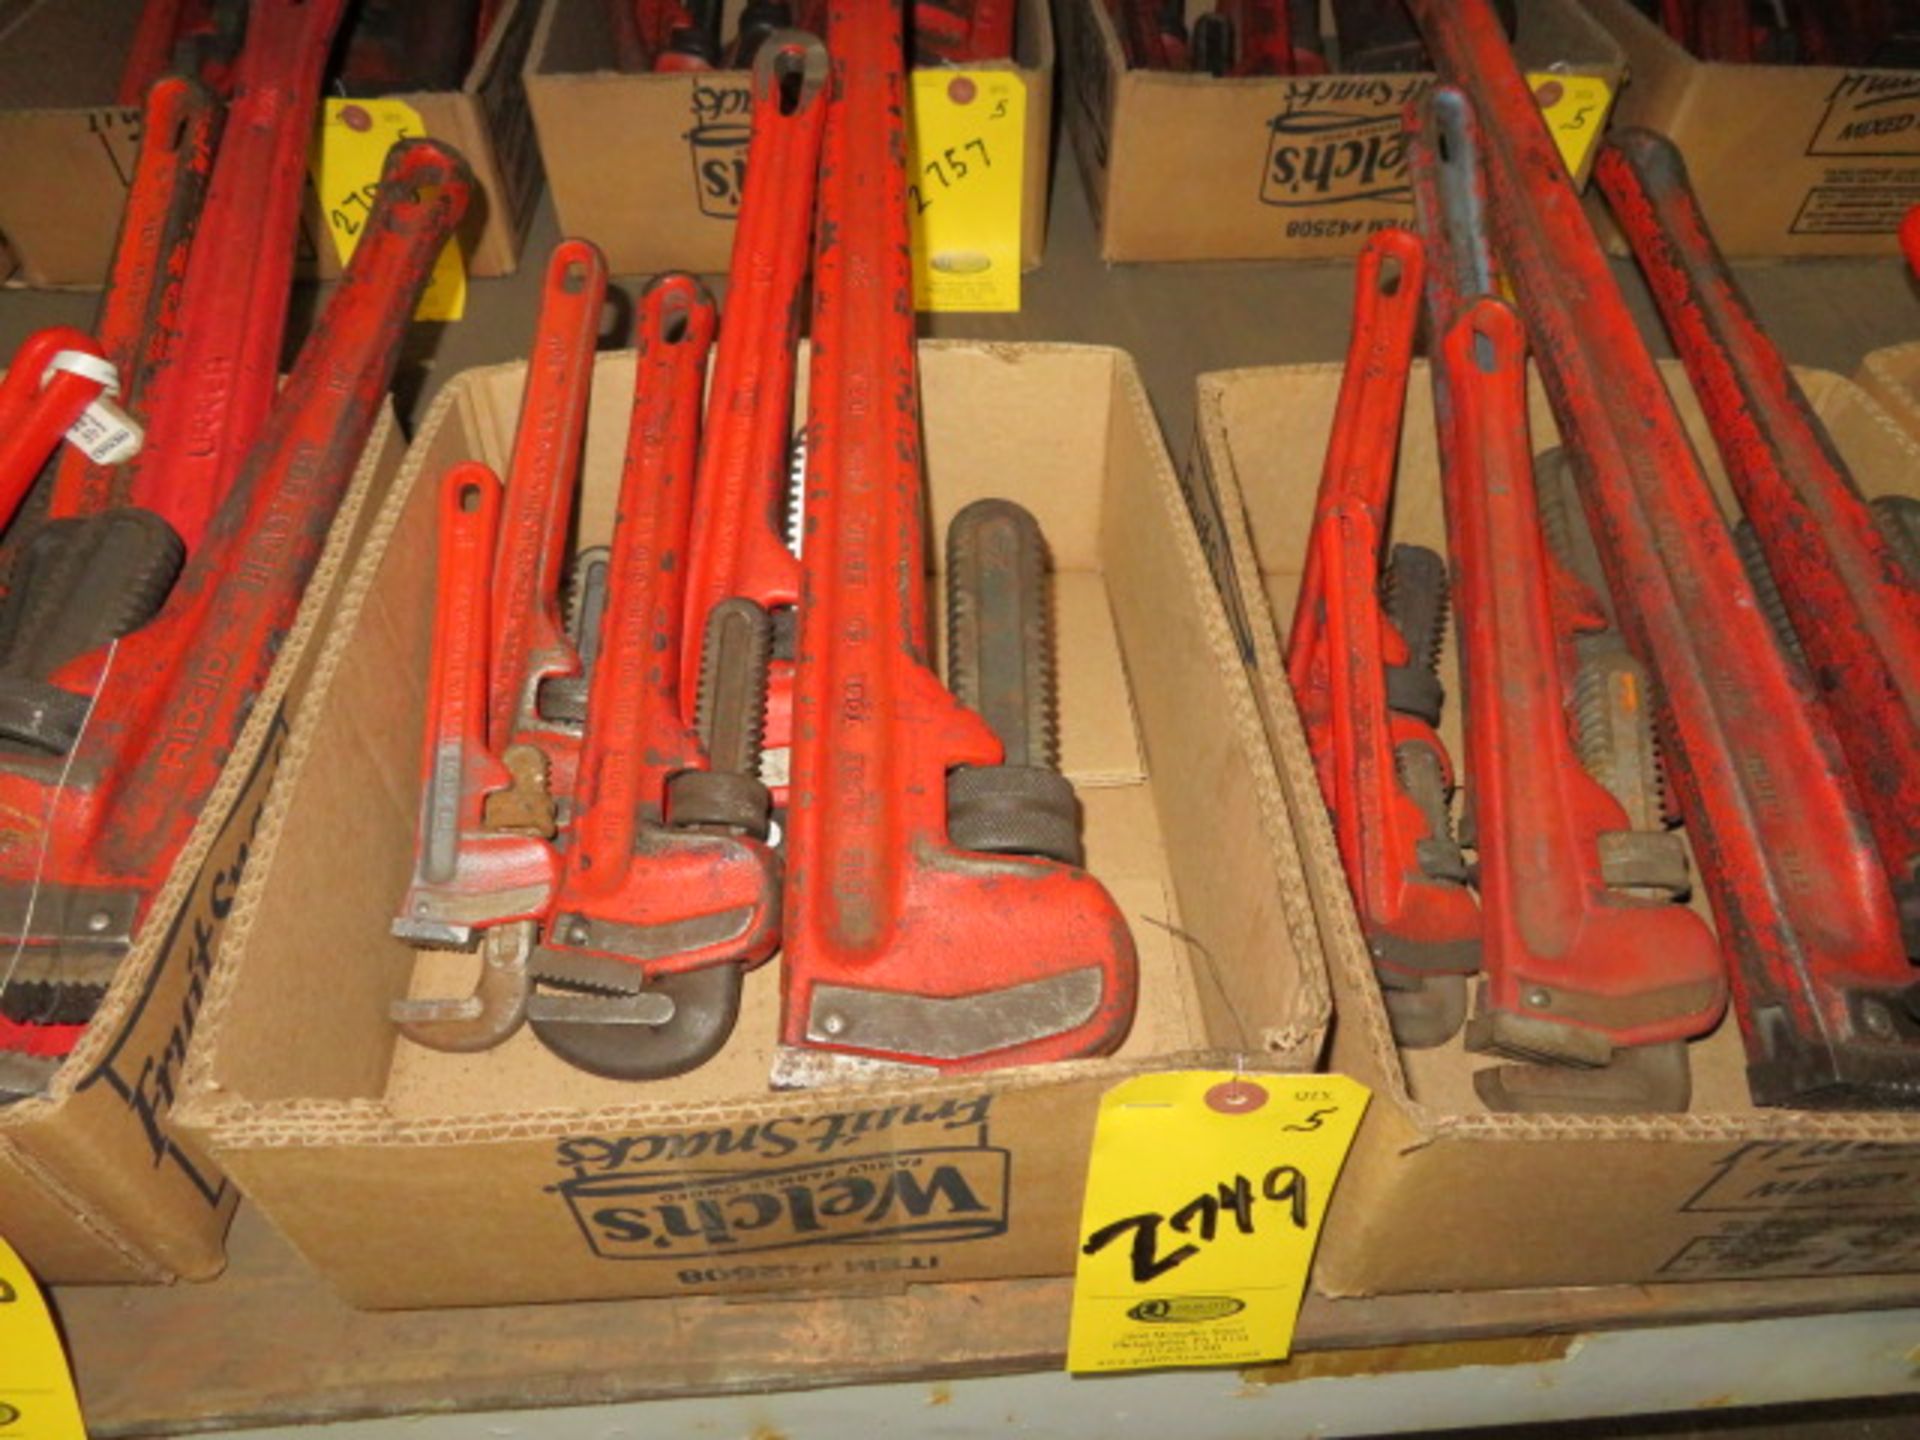 5- RIGID STEEL PIPE WRENCHES, 8" - 24"